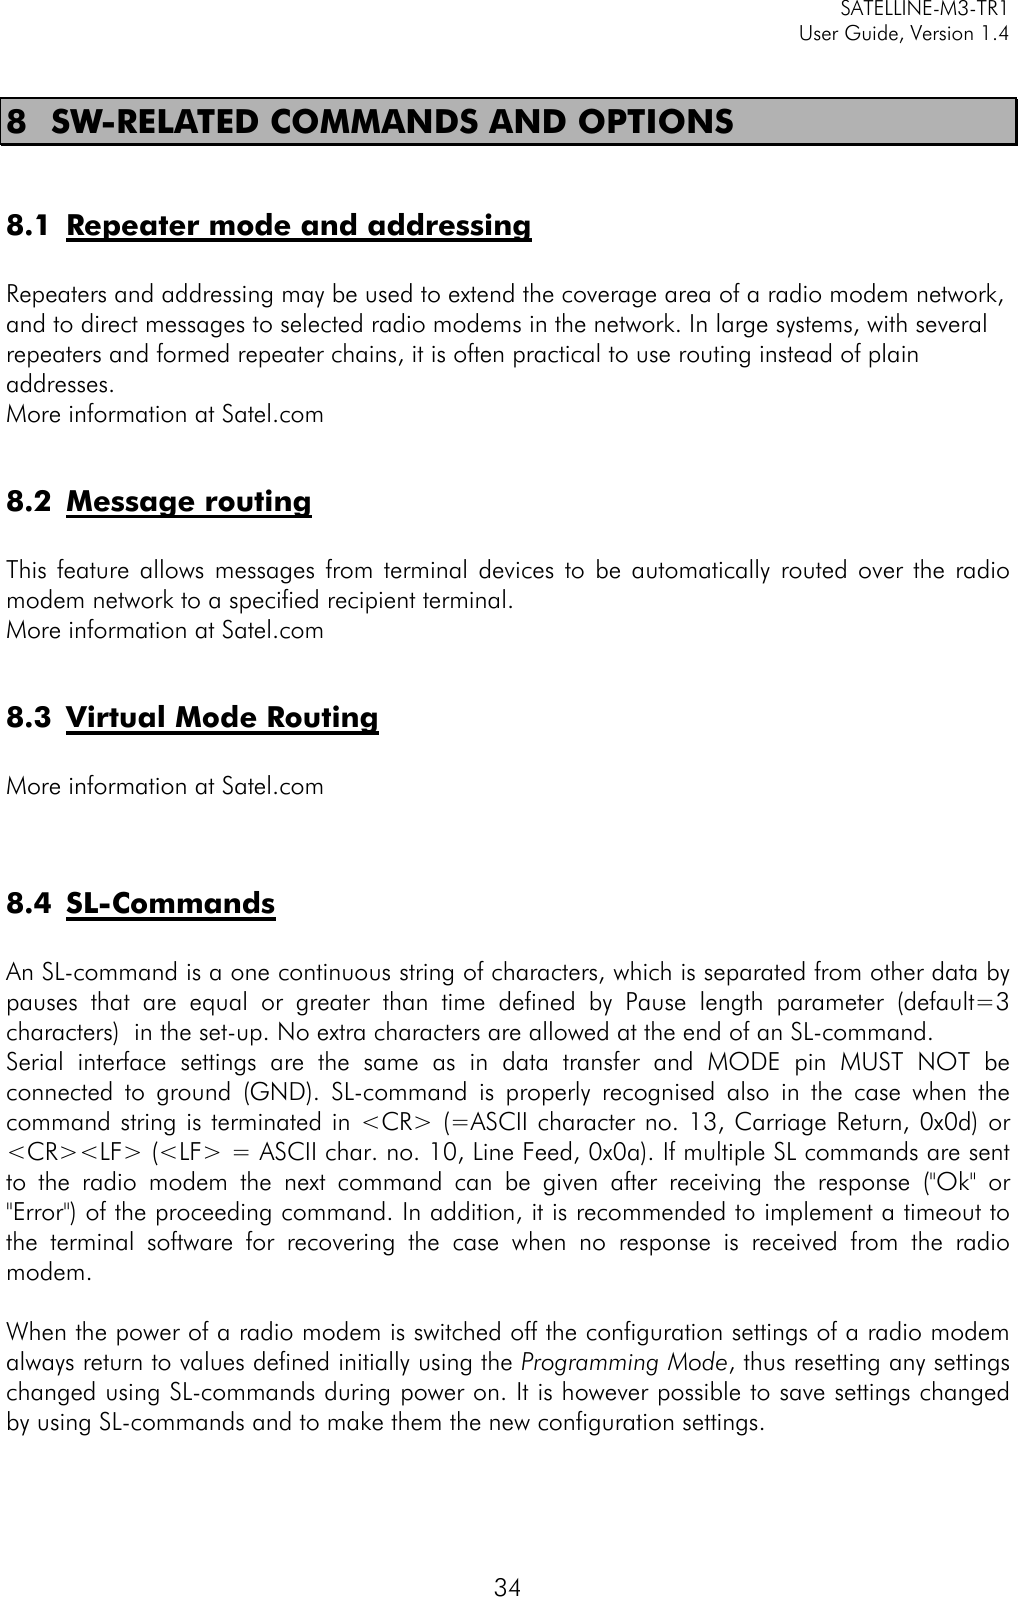   SATELLINE-M3-TR1     User Guide, Version 1.4   34 8 SW-RELATED COMMANDS AND OPTIONS  8.1 Repeater mode and addressing  Repeaters and addressing may be used to extend the coverage area of a radio modem network, and to direct messages to selected radio modems in the network. In large systems, with several repeaters and formed repeater chains, it is often practical to use routing instead of plain addresses.  More information at Satel.com  8.2 Message routing  This feature allows messages from terminal devices to be automatically routed over the radio modem network to a specified recipient terminal.  More information at Satel.com  8.3 Virtual Mode Routing  More information at Satel.com   8.4 SL-Commands  An SL-command is a one continuous string of characters, which is separated from other data by pauses that are equal or greater than time defined by Pause length parameter (default=3 characters)  in the set-up. No extra characters are allowed at the end of an SL-command.  Serial interface settings are the same as in data transfer and MODE pin MUST NOT be connected to ground (GND). SL-command is properly recognised also in the case when the command string is terminated in &lt;CR&gt; (=ASCII character no. 13, Carriage Return, 0x0d) or &lt;CR&gt;&lt;LF&gt; (&lt;LF&gt; = ASCII char. no. 10, Line Feed, 0x0a). If multiple SL commands are sent to the radio modem the next command can be given after receiving the response (&quot;Ok&quot; or &quot;Error&quot;) of the proceeding command. In addition, it is recommended to implement a timeout to the terminal software for recovering the case when no response is received from the radio modem.  When the power of a radio modem is switched off the configuration settings of a radio modem always return to values defined initially using the Programming Mode, thus resetting any settings changed using SL-commands during power on. It is however possible to save settings changed by using SL-commands and to make them the new configuration settings.   